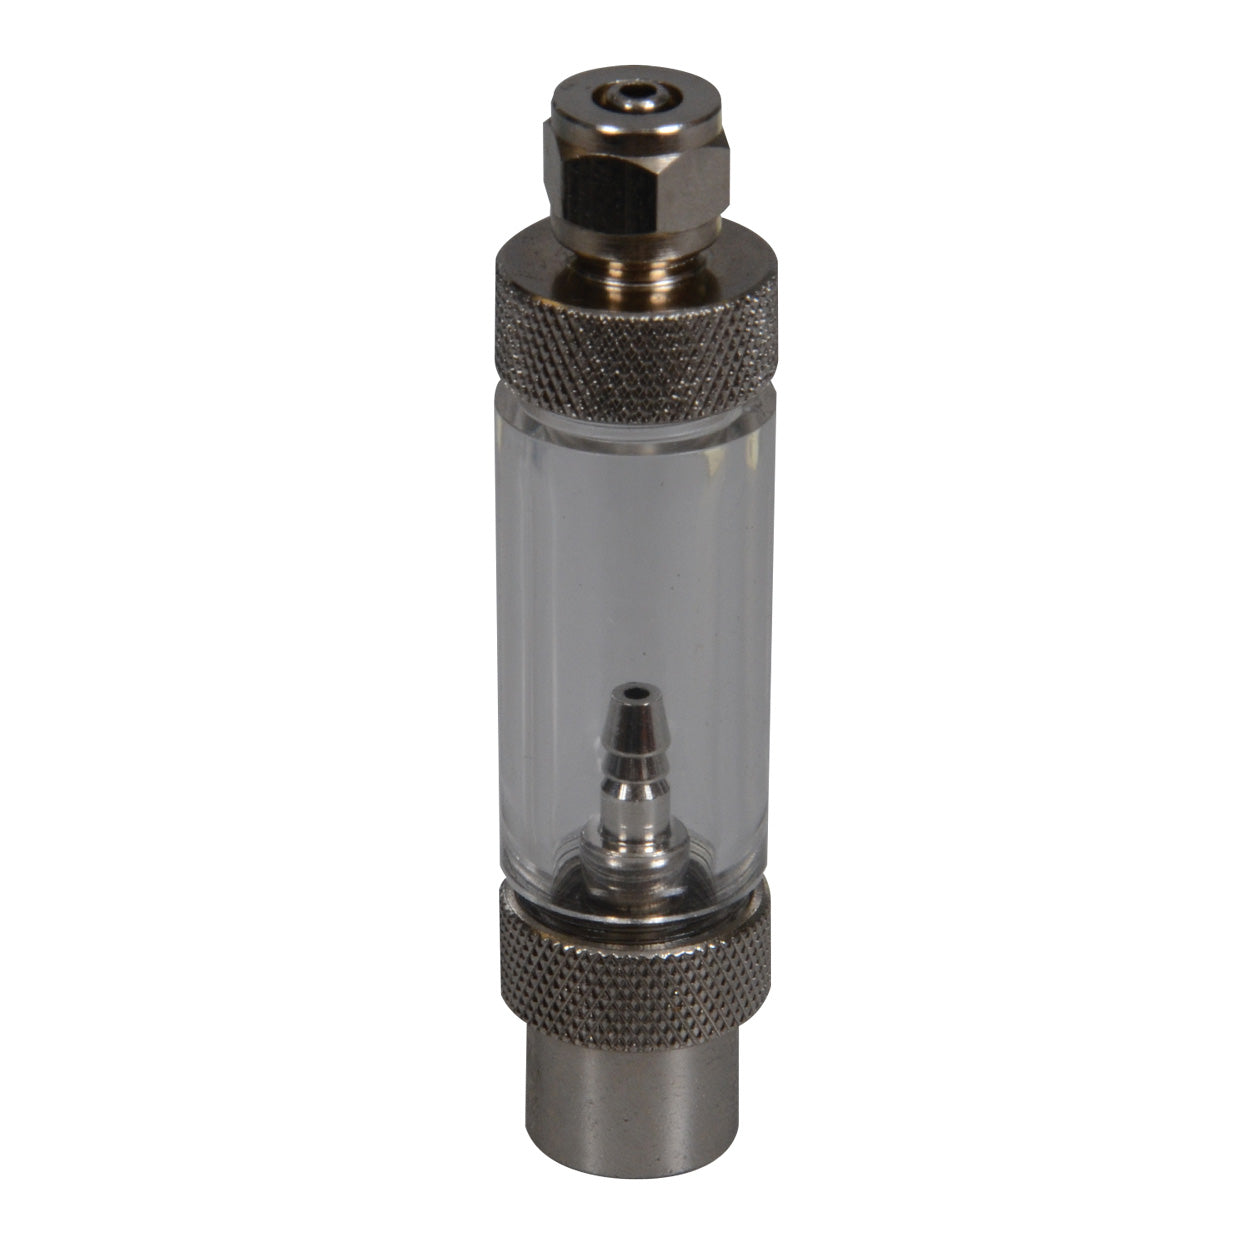 Ista 2-in-1 Metal Bubble Counter & Check Valve - Threaded